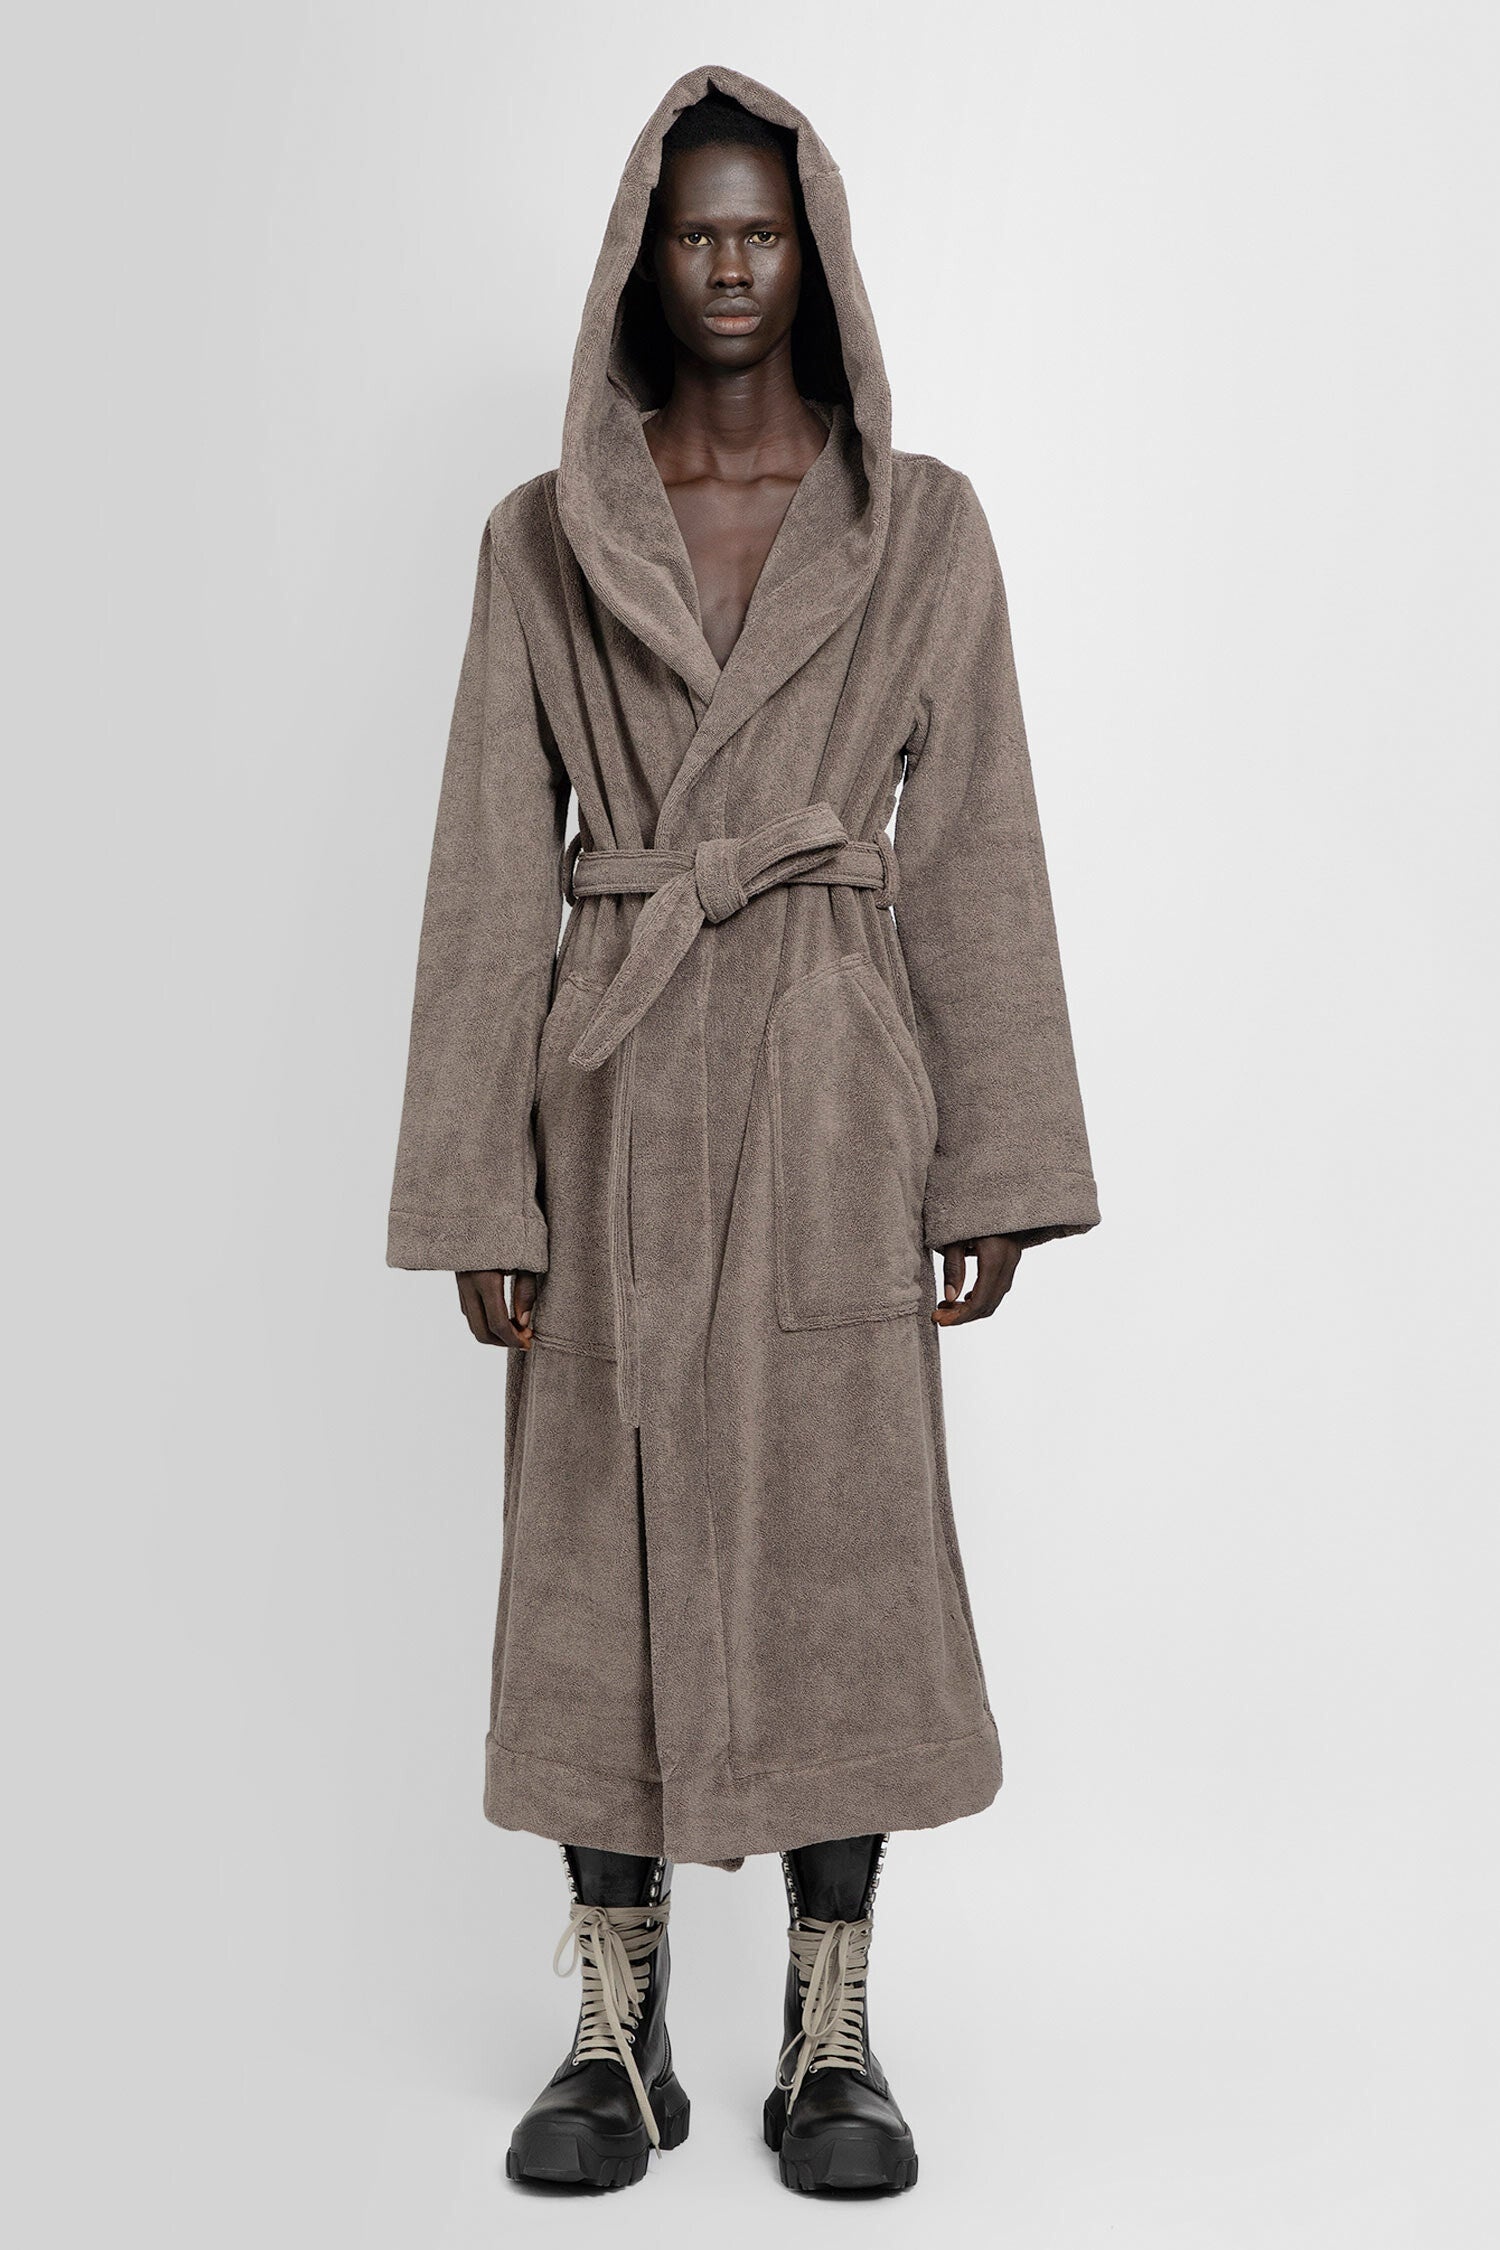 RICK OWENS MAN BROWN OBJECTS - 1